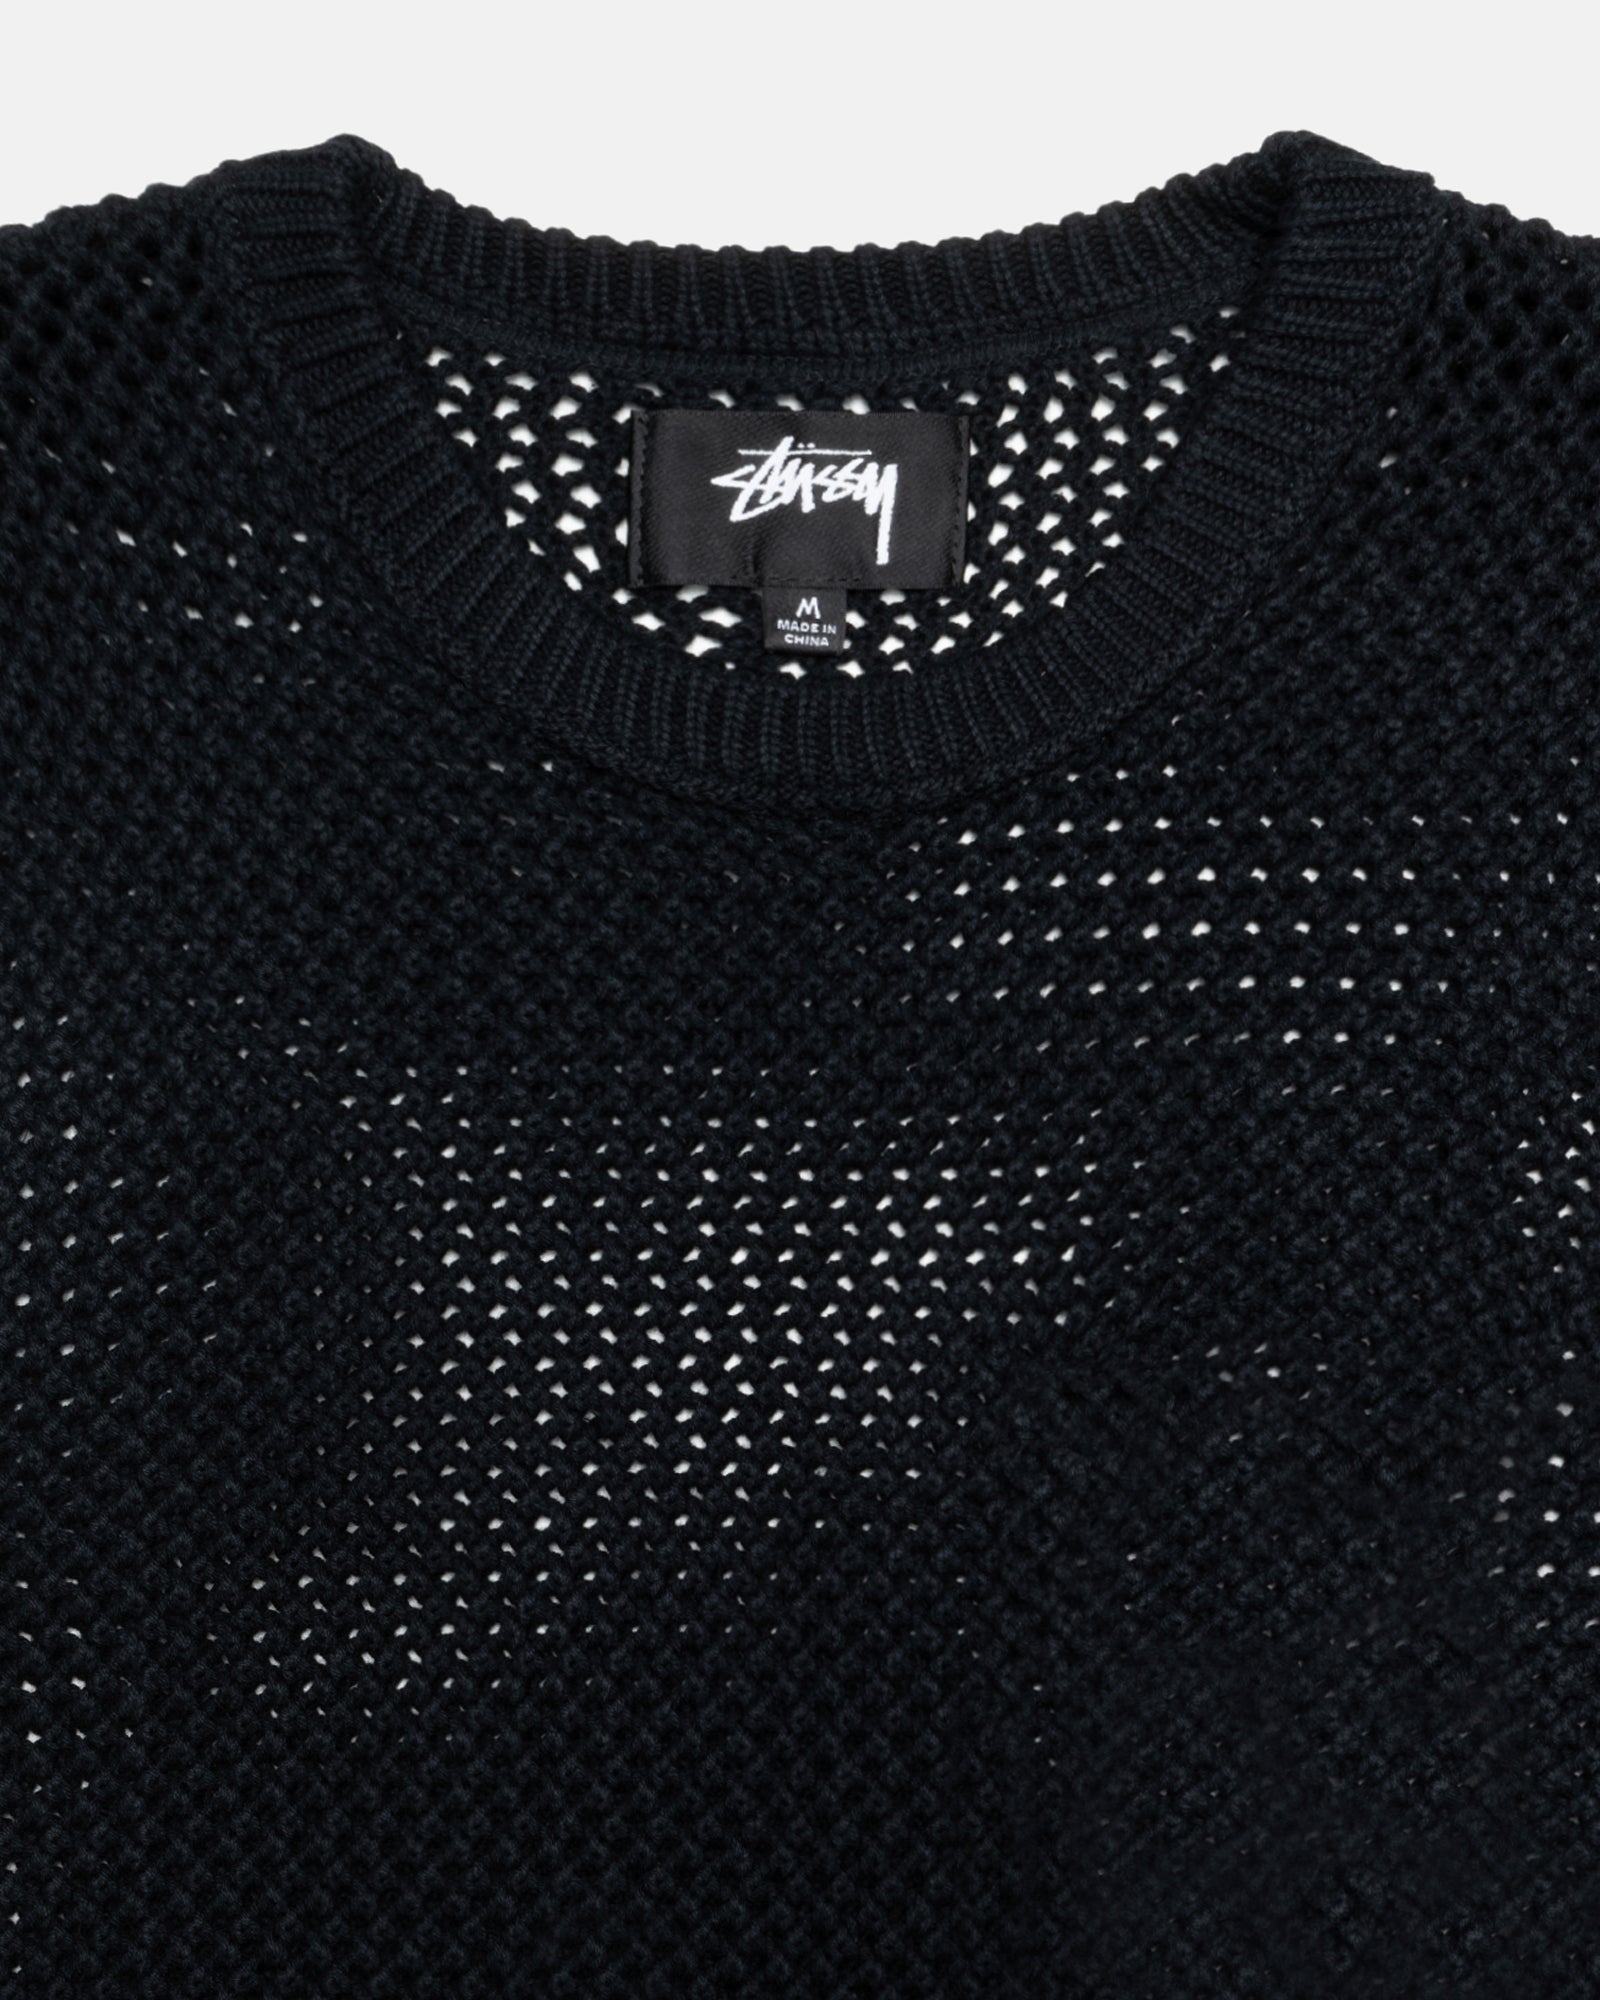 Pigment Dyed Loose Gauge Knit Sweater - Men's Sweaters | Stüssy